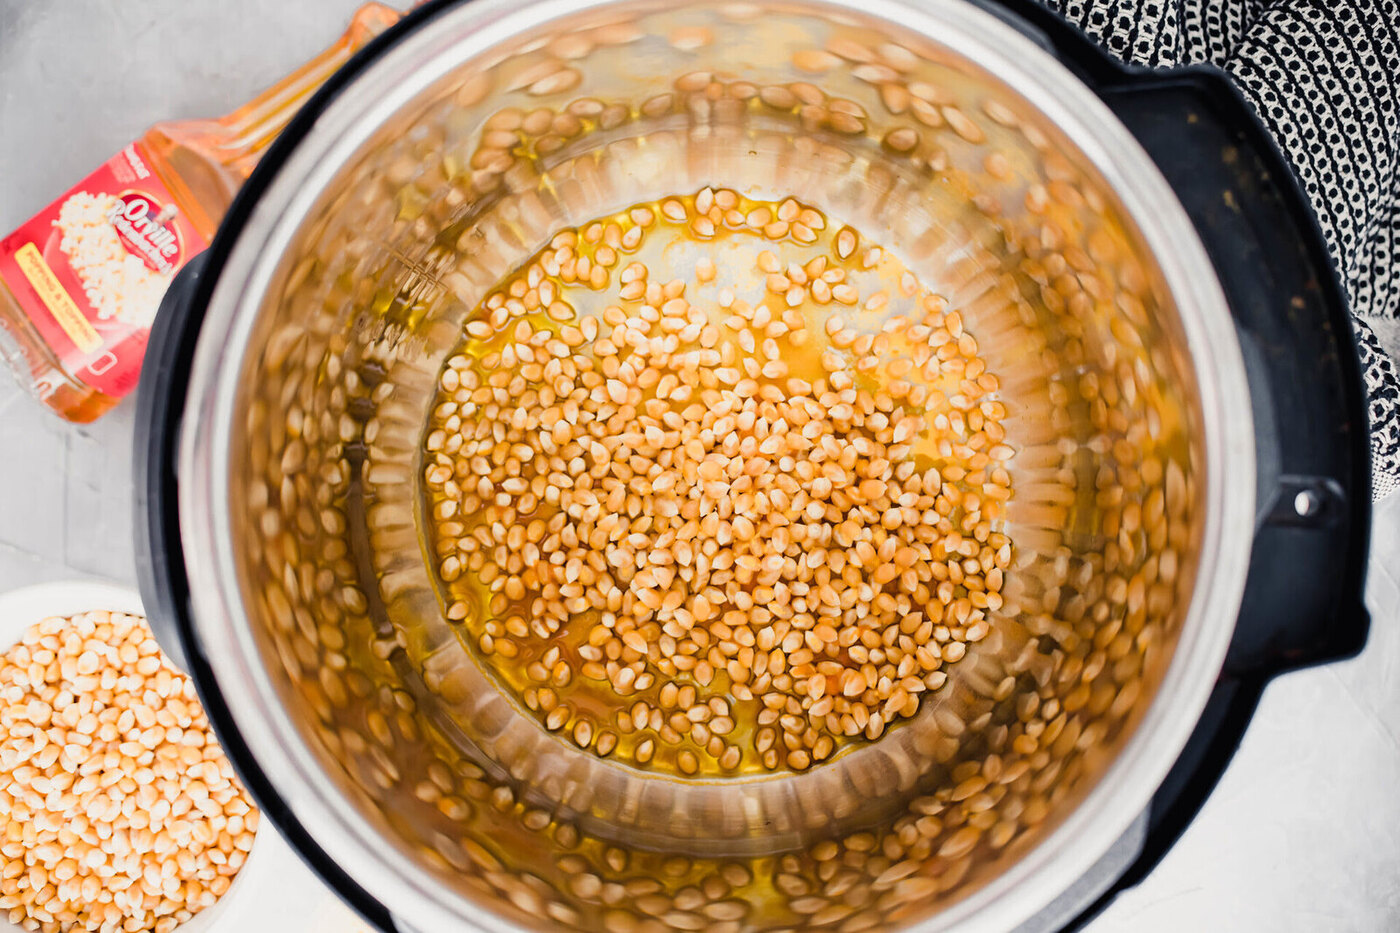 How To Pop Popcorn In Electric Pressure Cooker